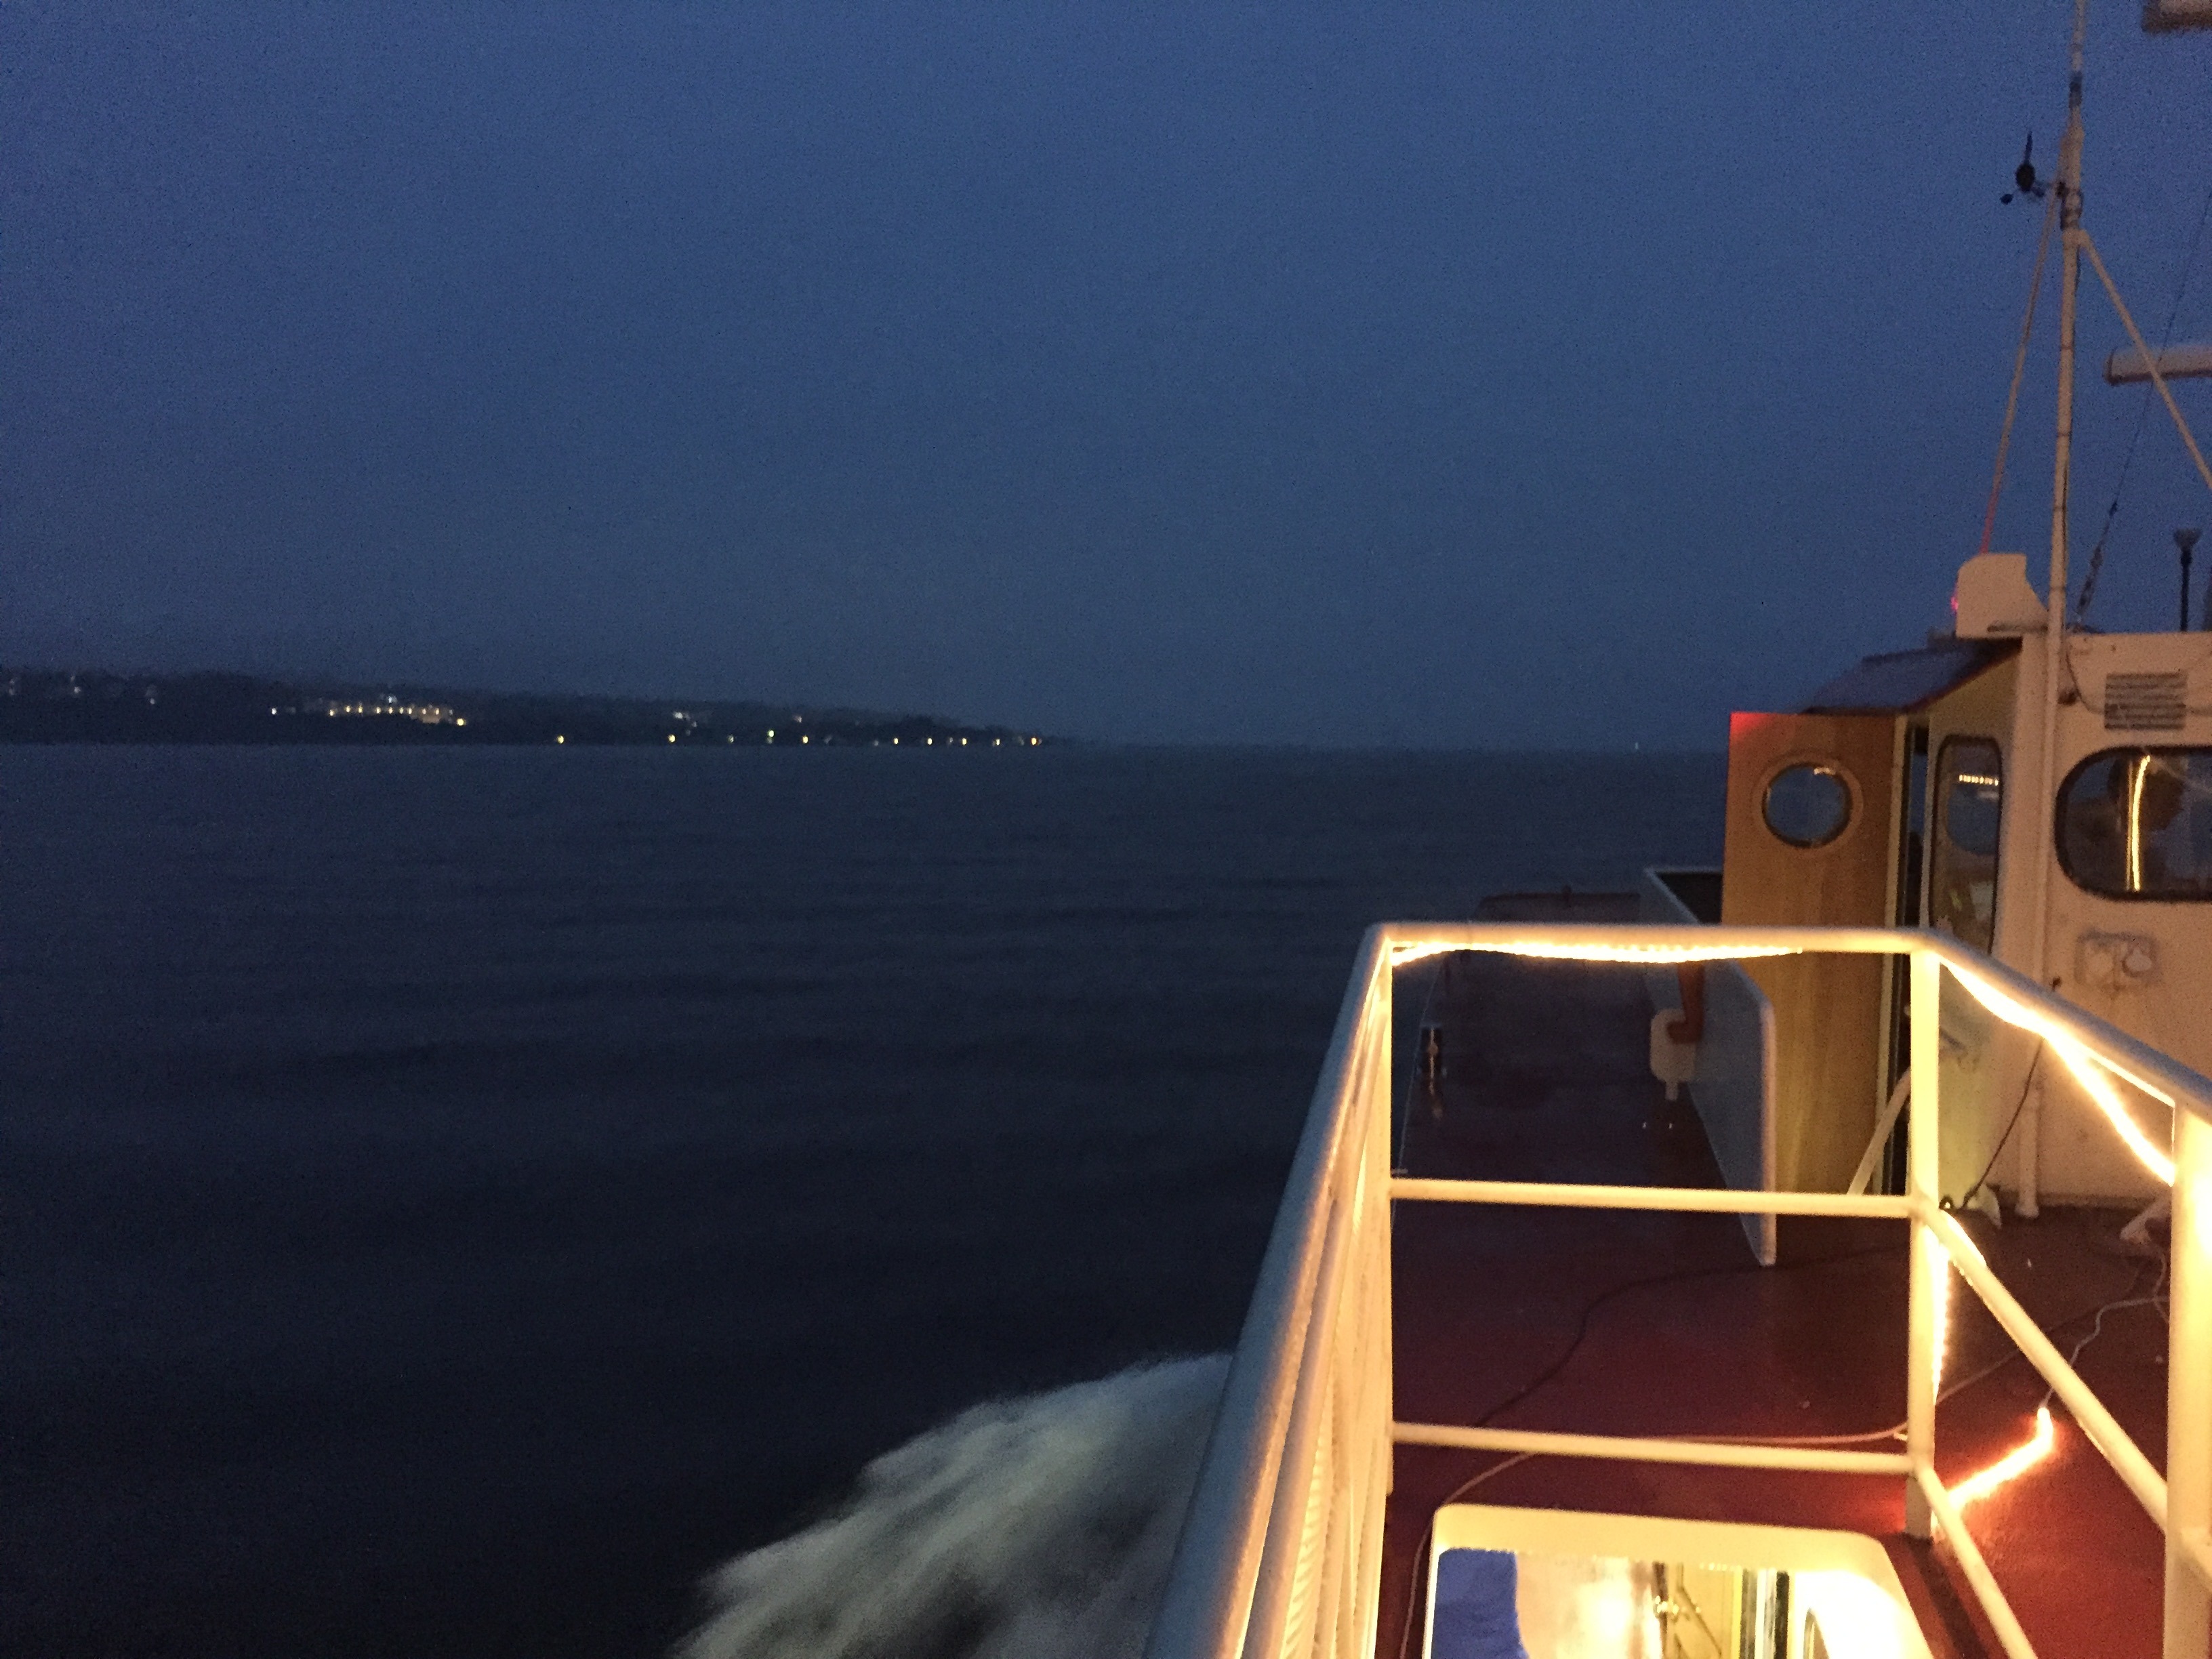 Coming back across the Straits at night is always a beautiful experience - with the island